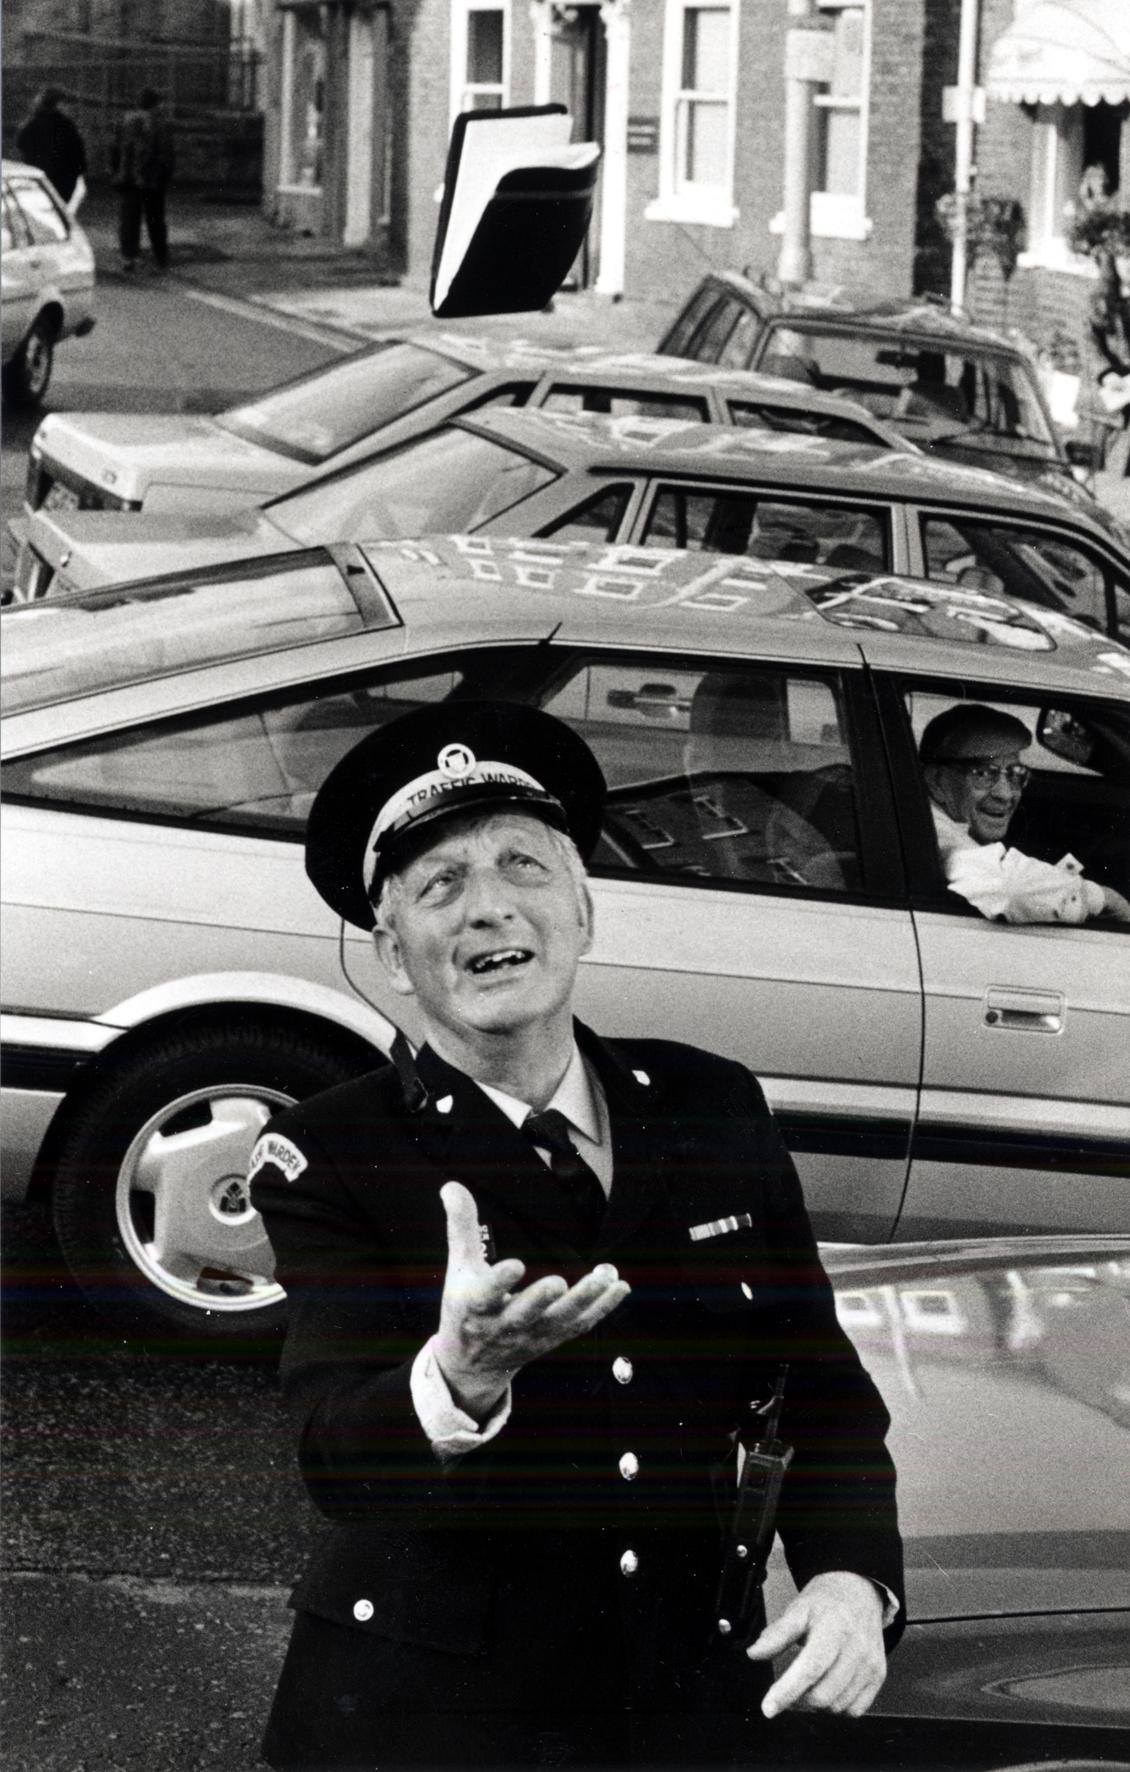 Former Hereford Traffic Warden Tony Wheatstone, a well-known face in the city.